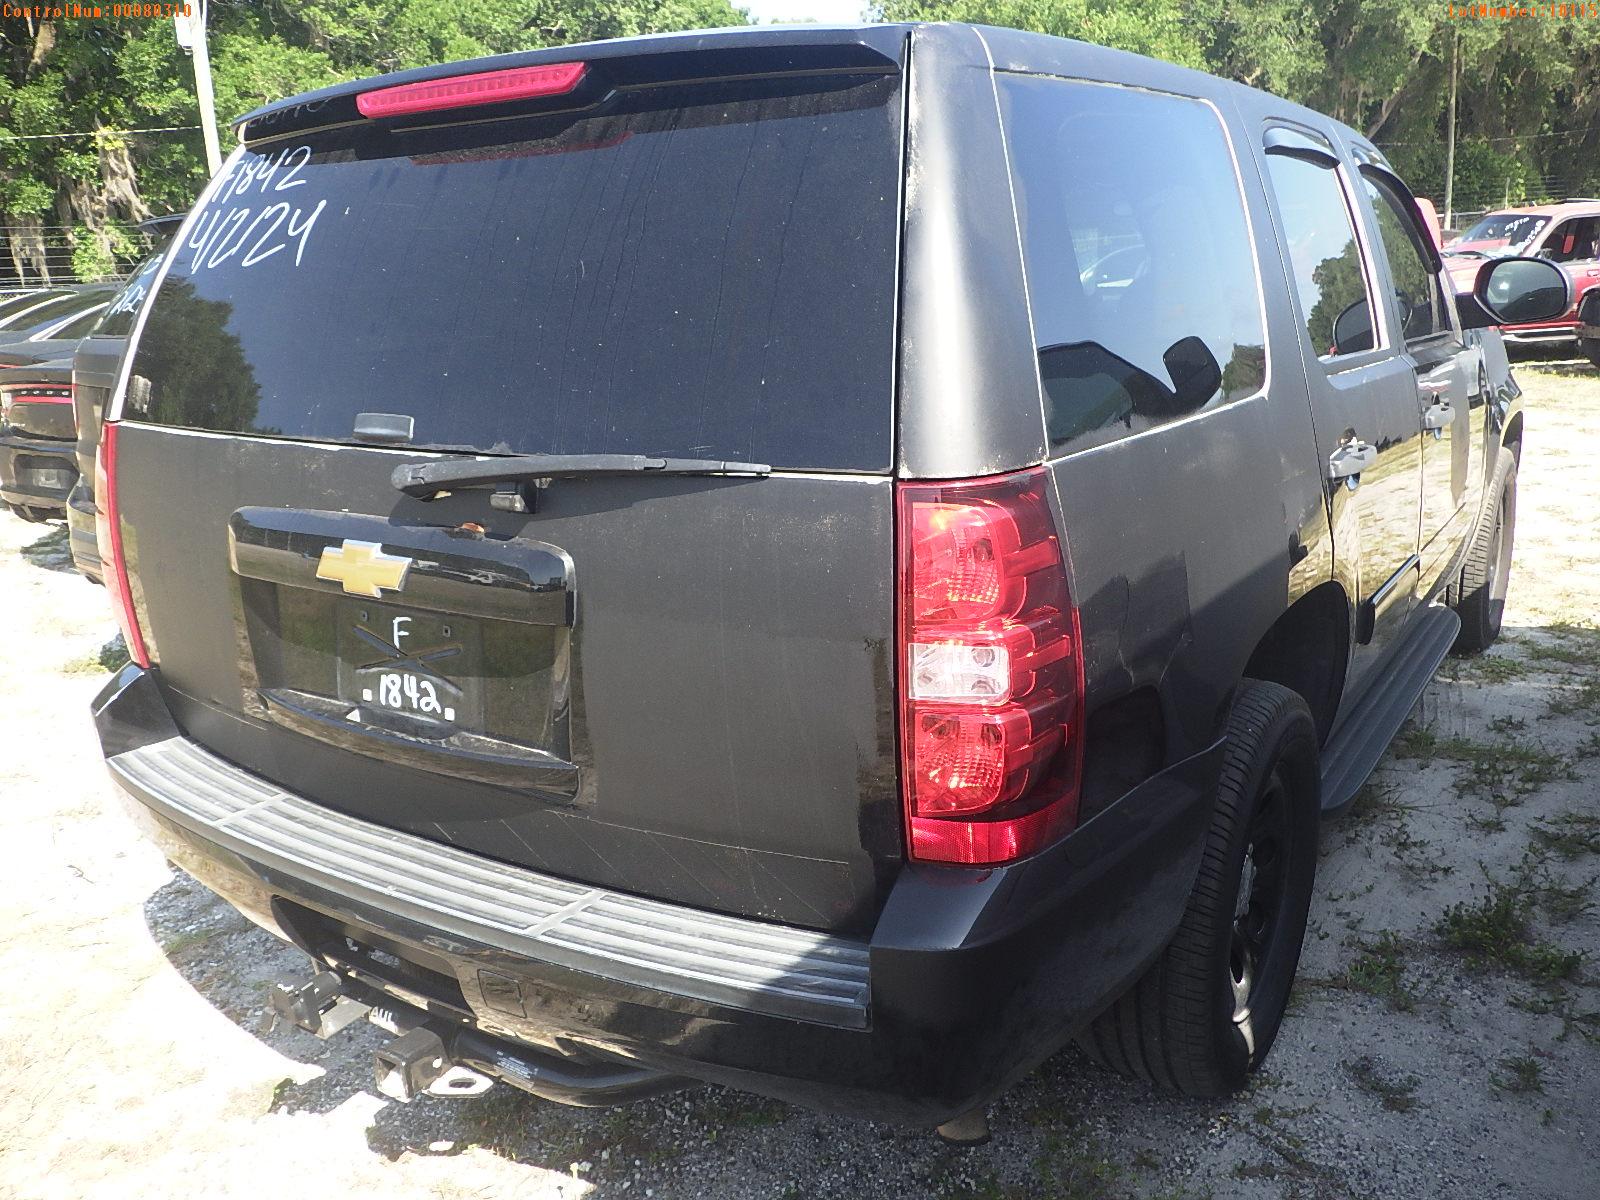 5-10115 (Cars-SUV 4D)  Seller: Florida State F.H.P. 2014 CHEV TAHOE